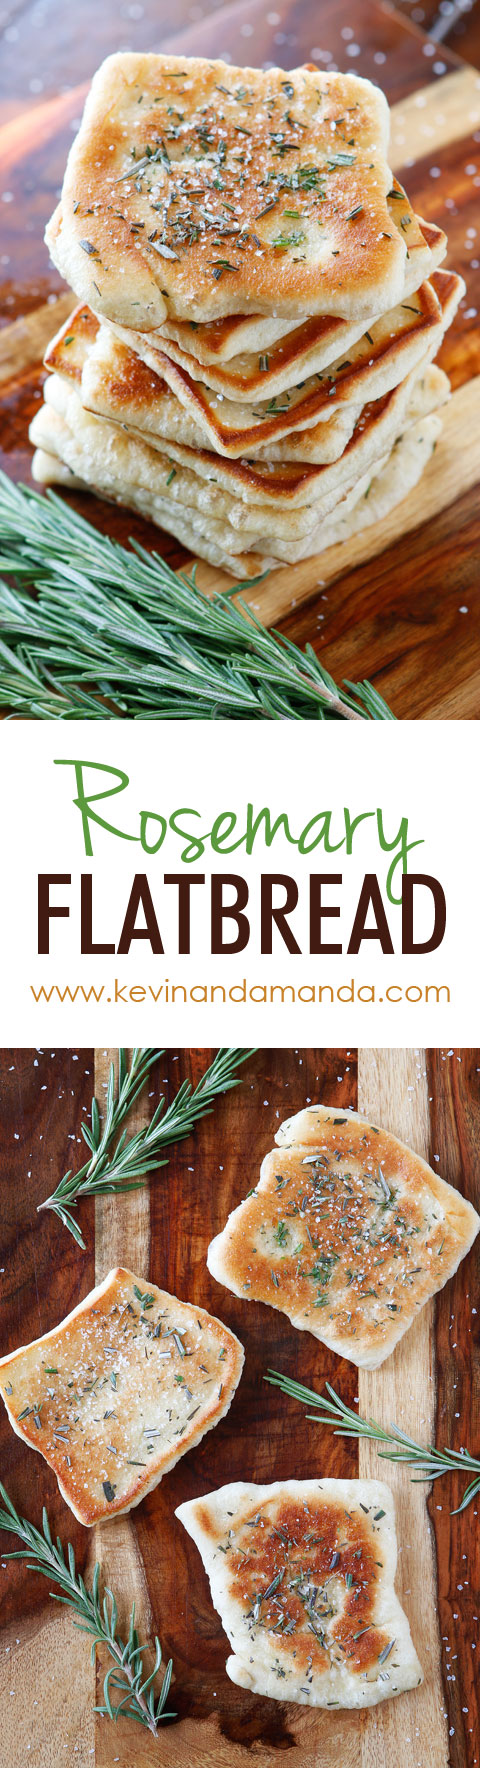 The PERFECT appetizer or side dish to serve with dinner! This bread is SO quick and easy to whip up. It's lightly fried in olive oil and topped with fresh rosemary and sea salt. The perfect combination!! You have to make this!!